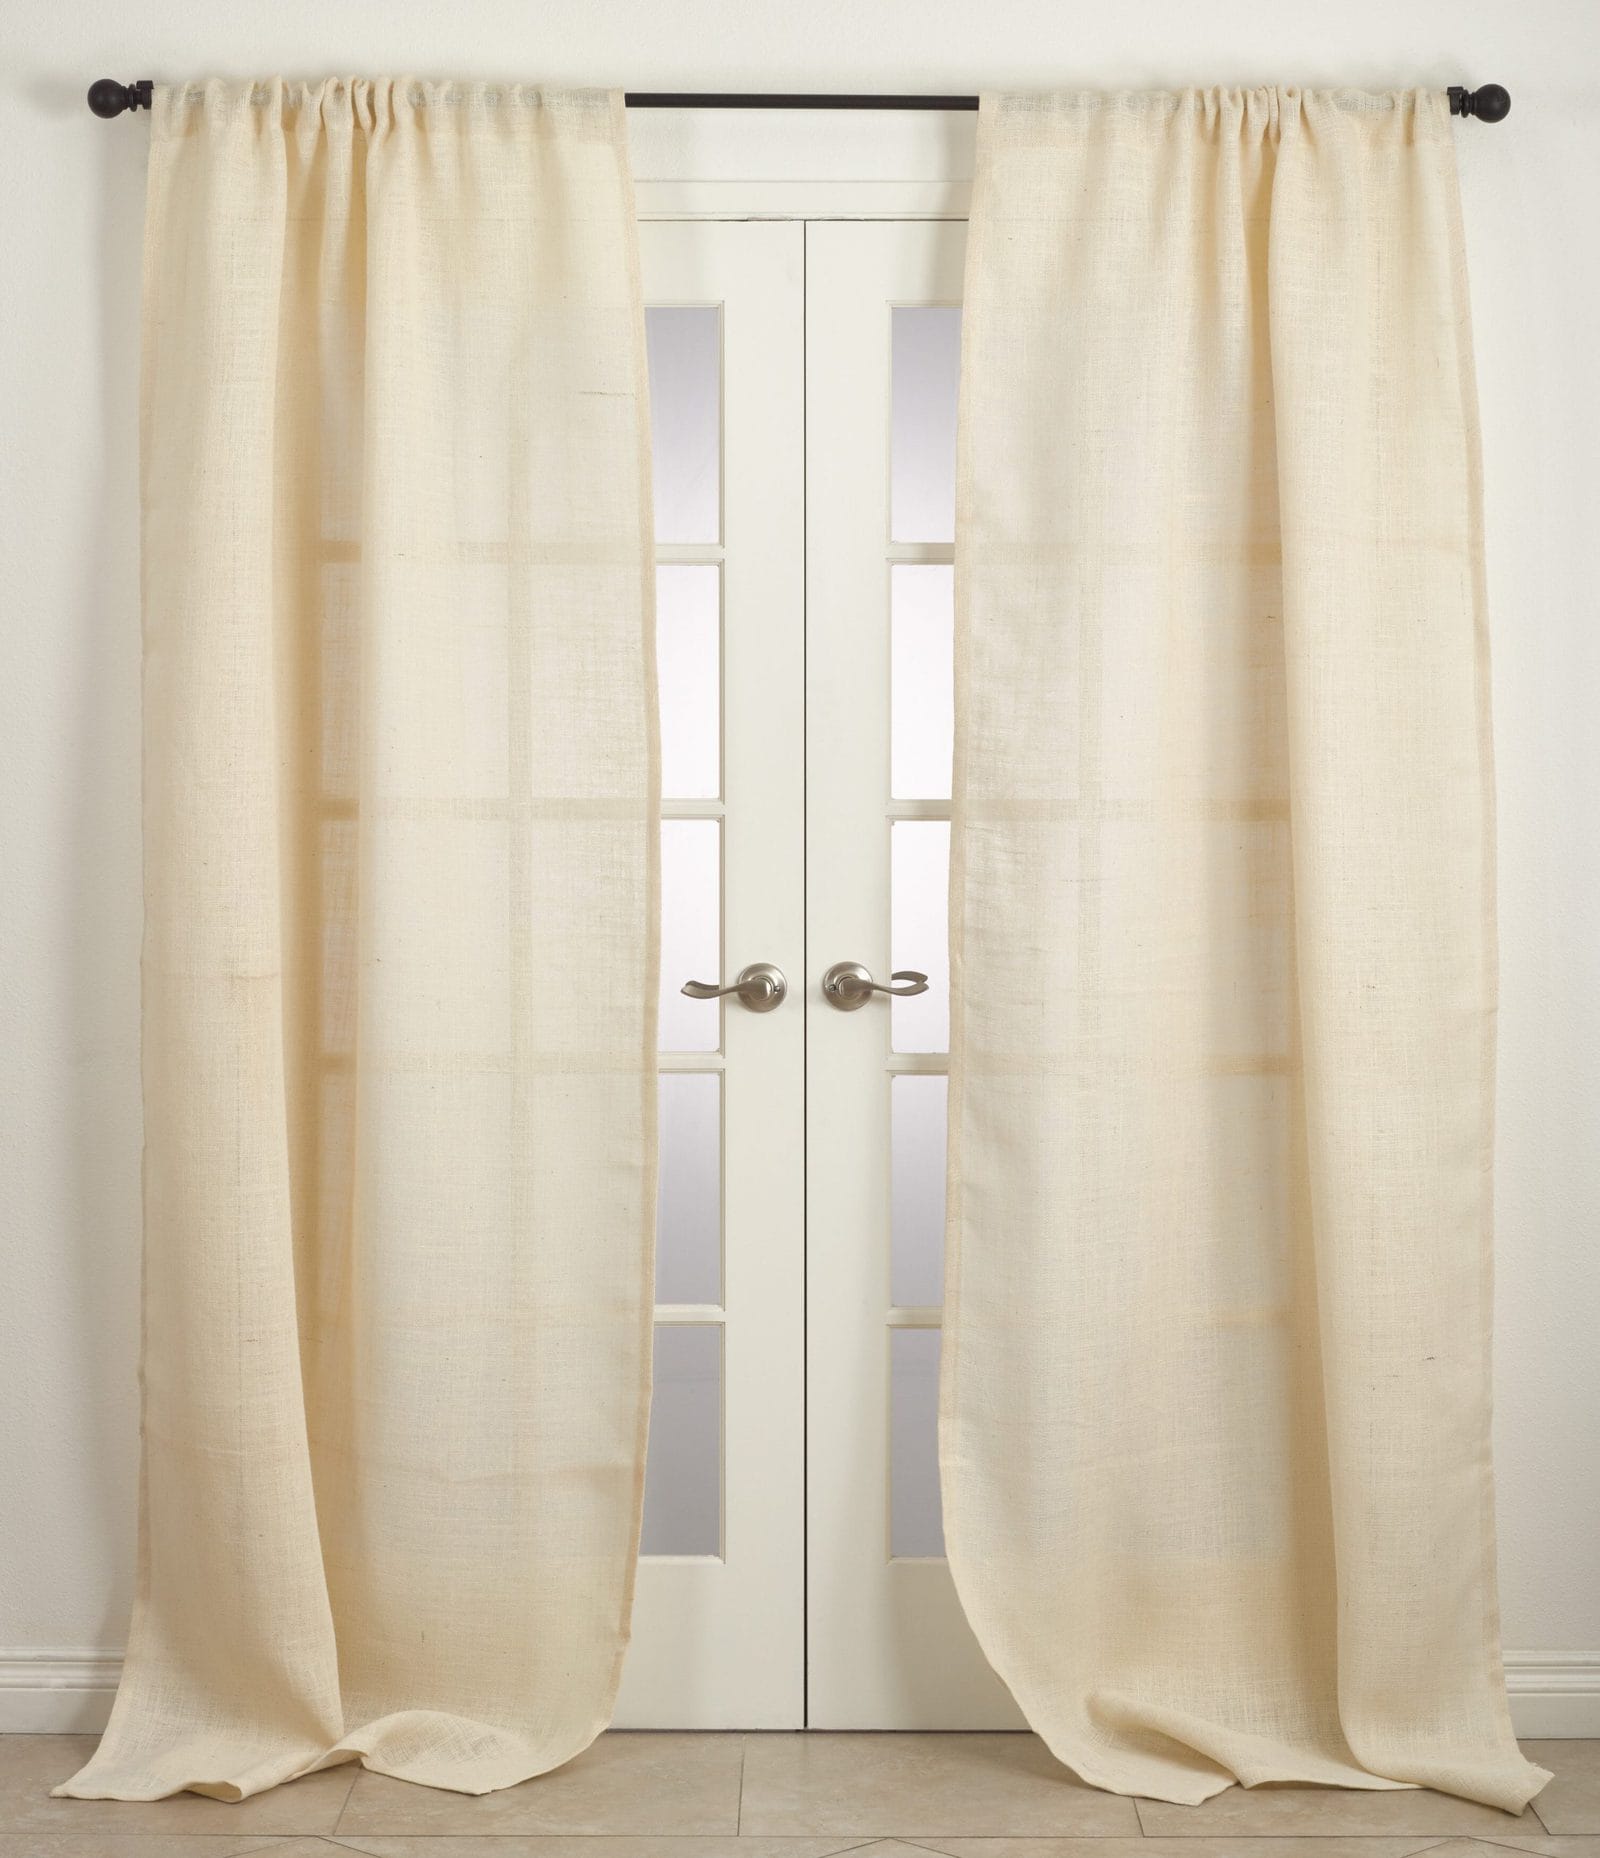 12 Burlap Curtains for a Rustic Look scaled